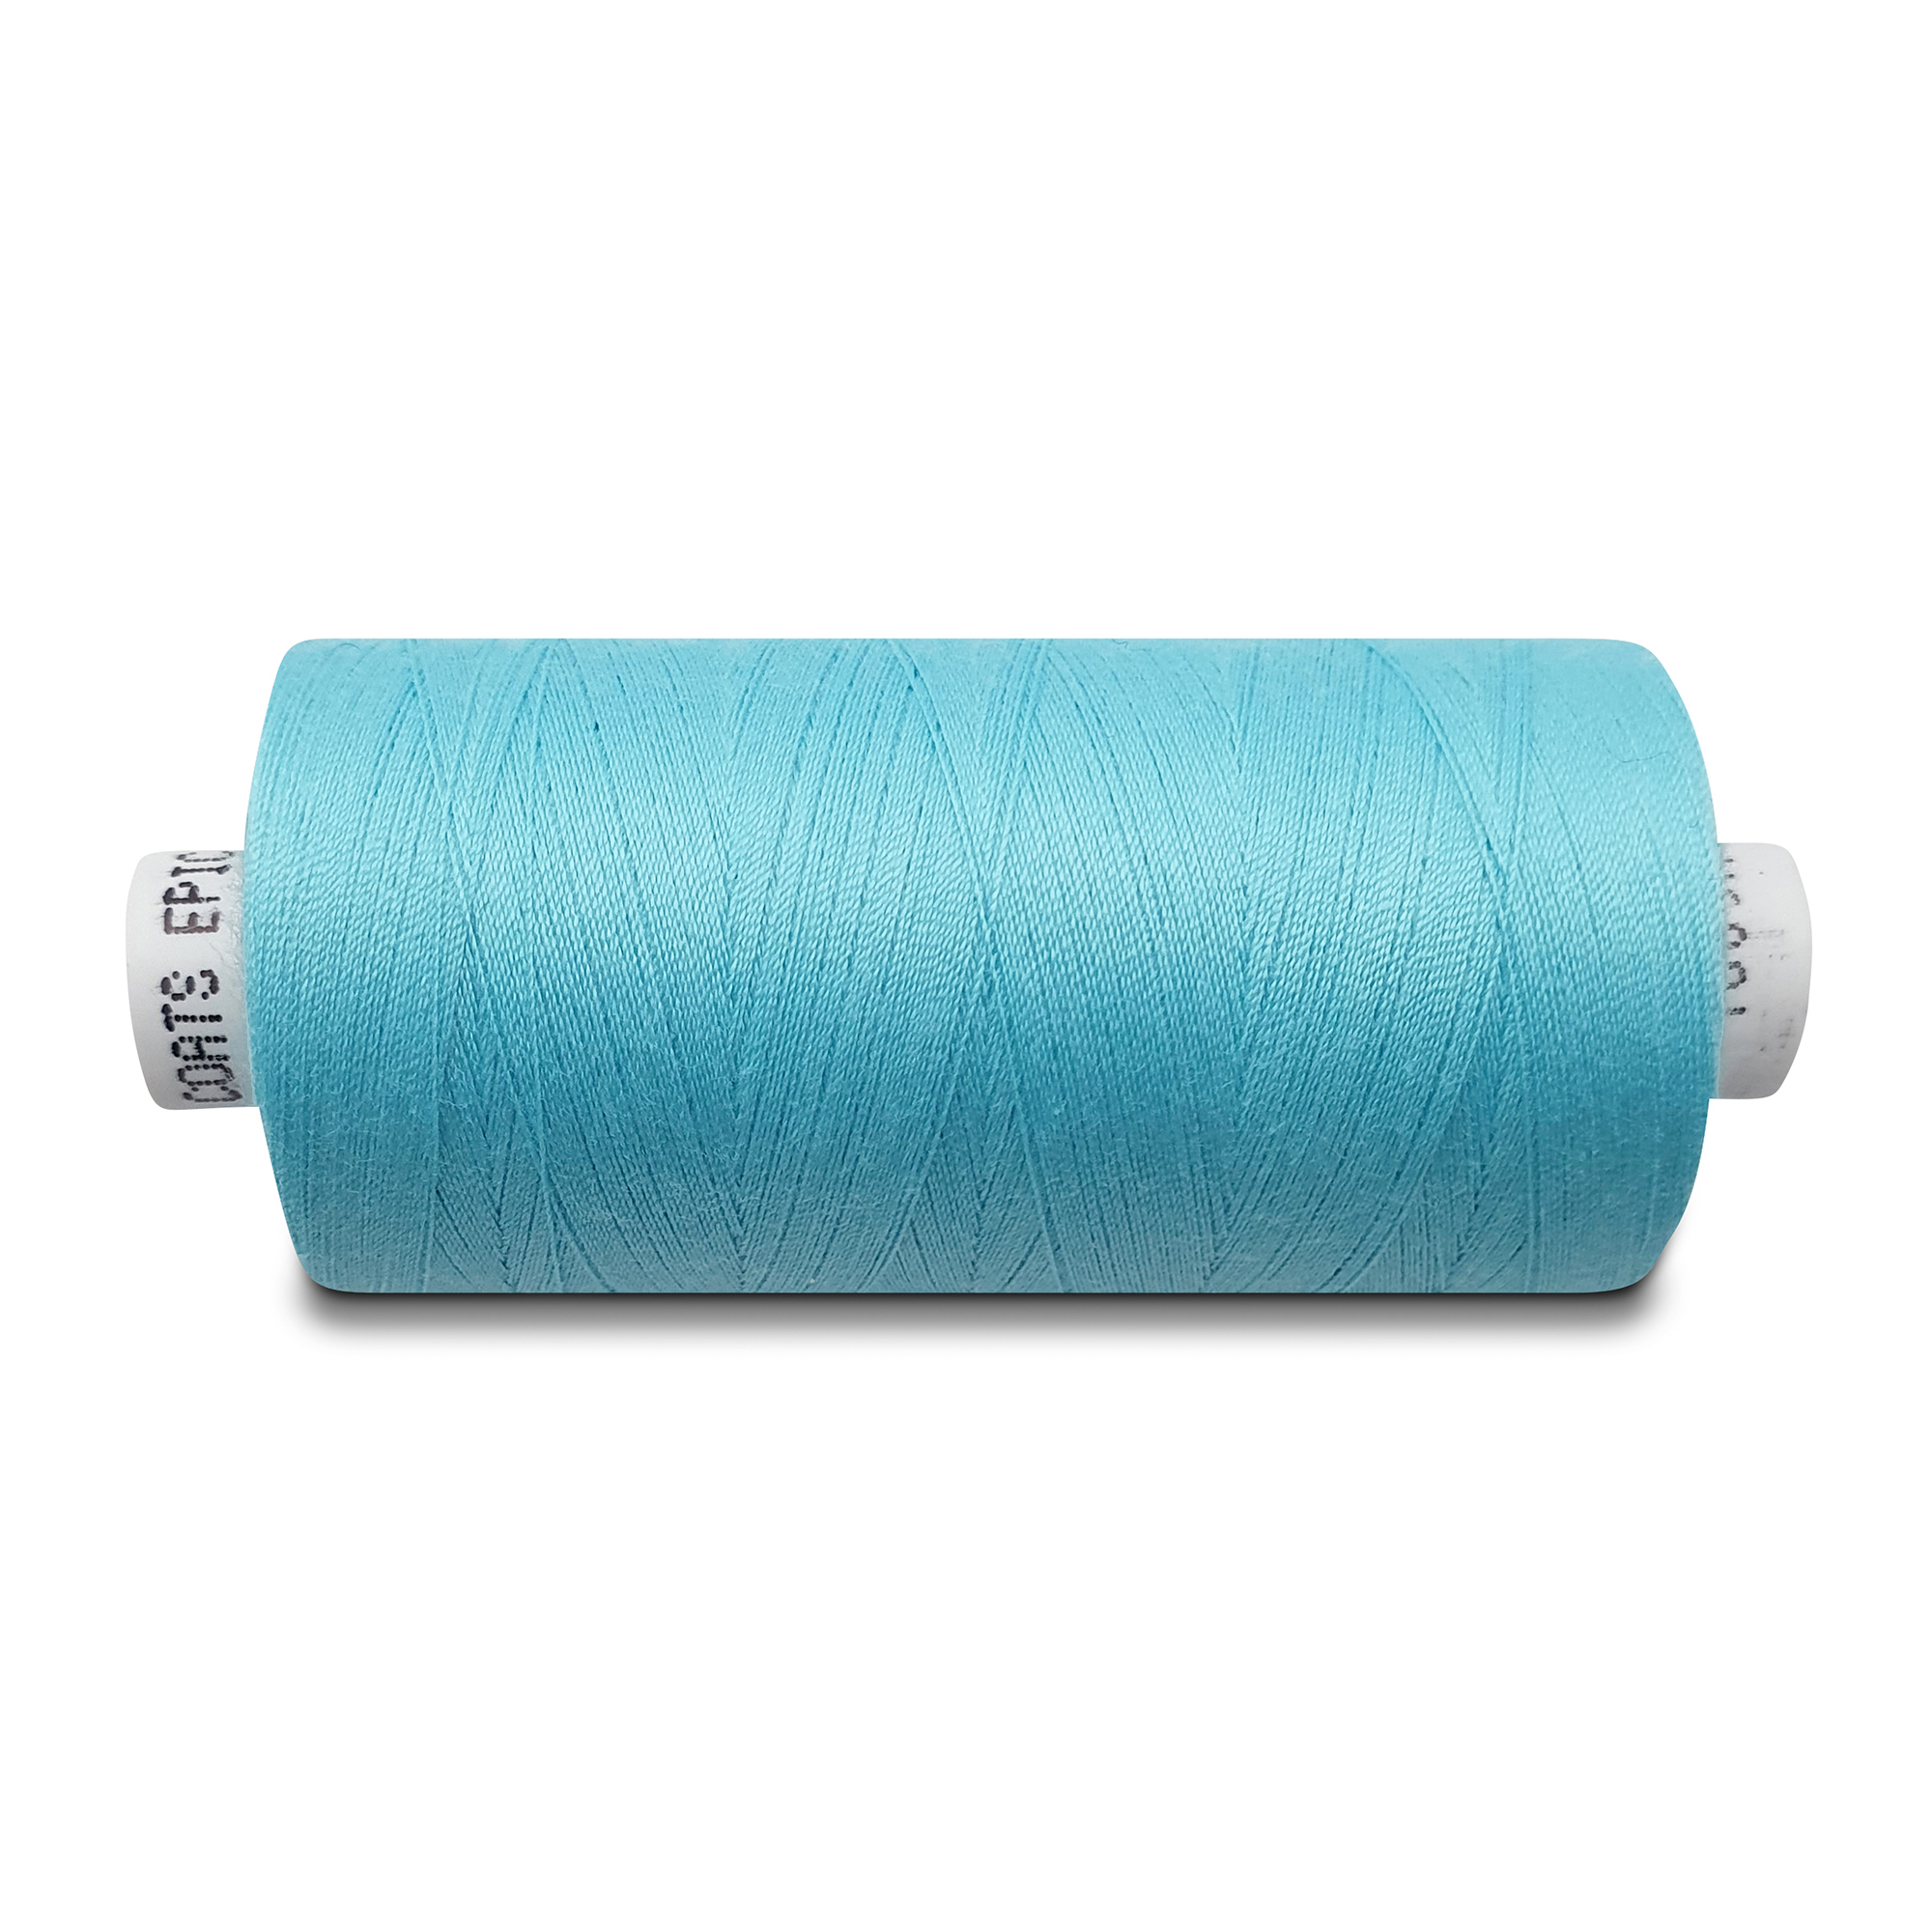 Jeans/Sewing thread greenish-turquoise